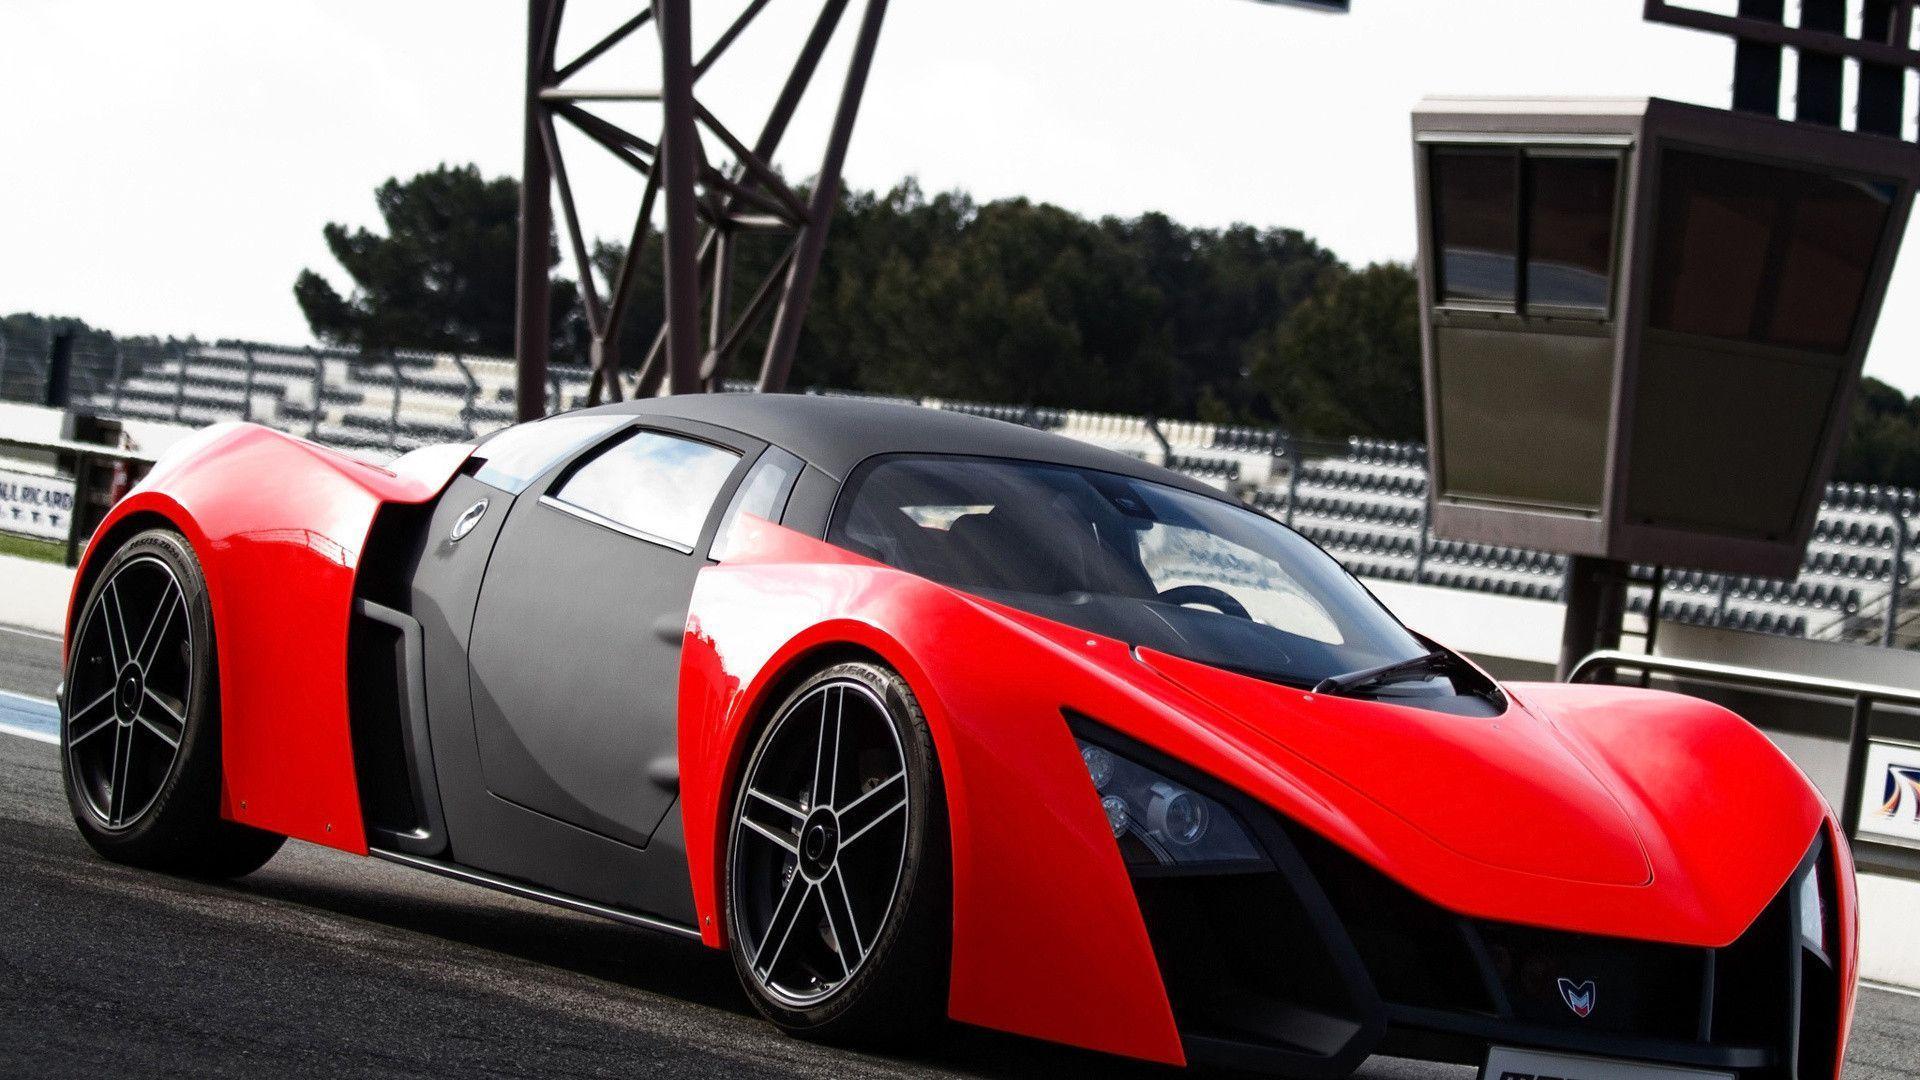 Red Sports Car Marussia